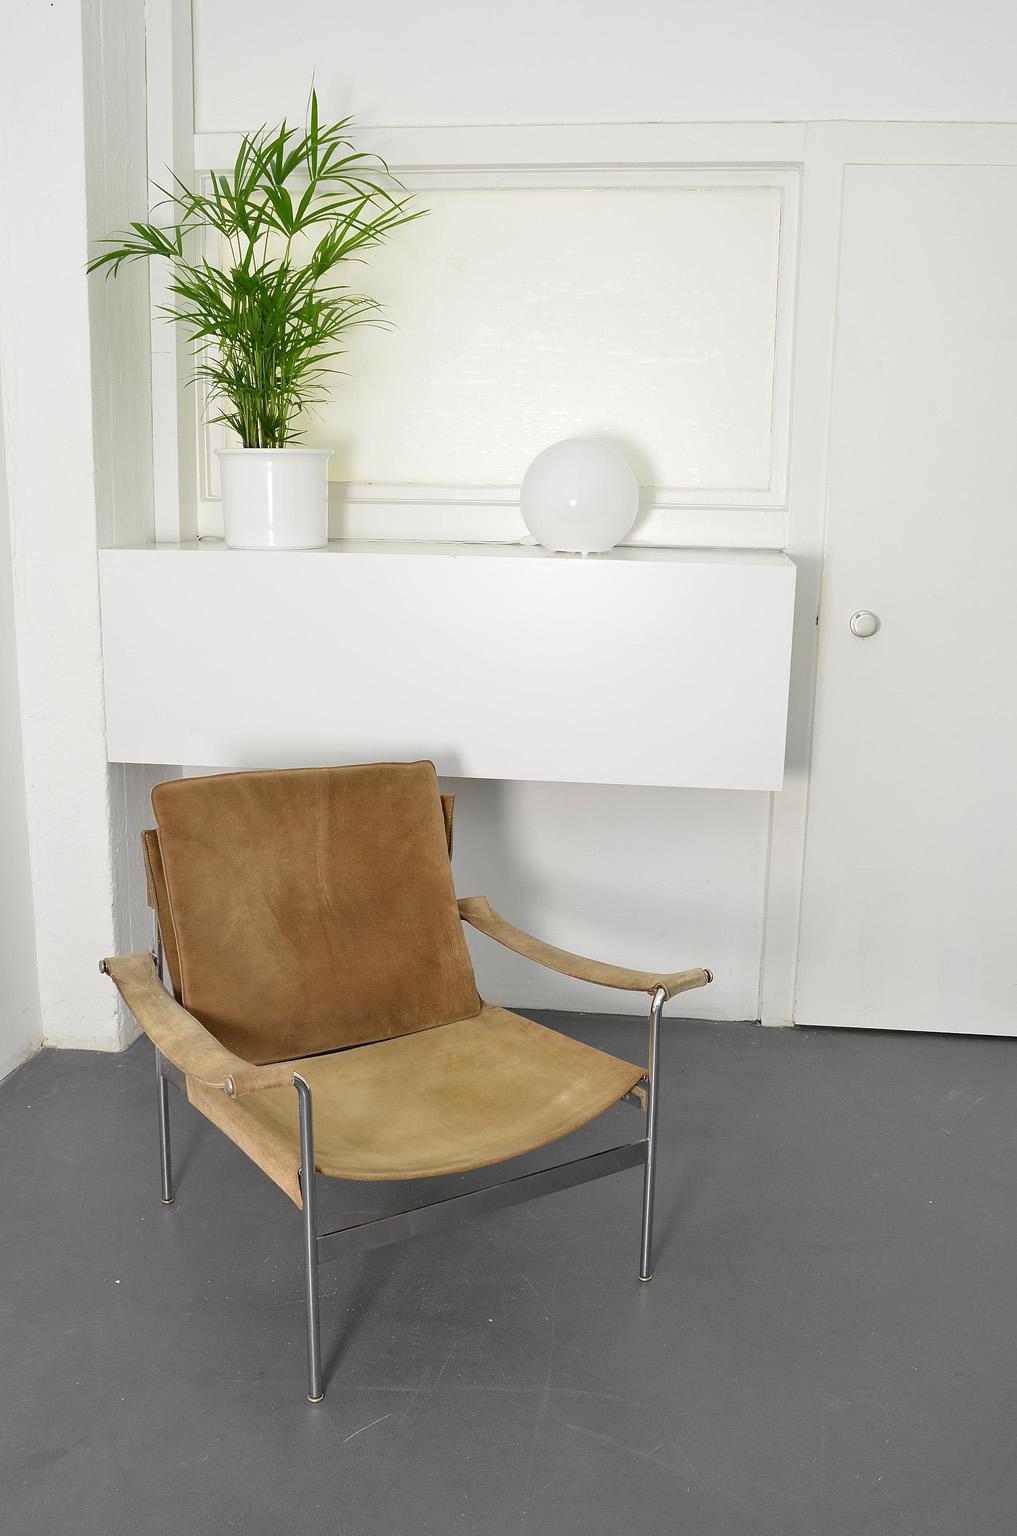 This Suede sling lounge chair or armchair model D99 was designed by Hans Könecke / Koenecke for Tecta in 1965. Beige / light brown